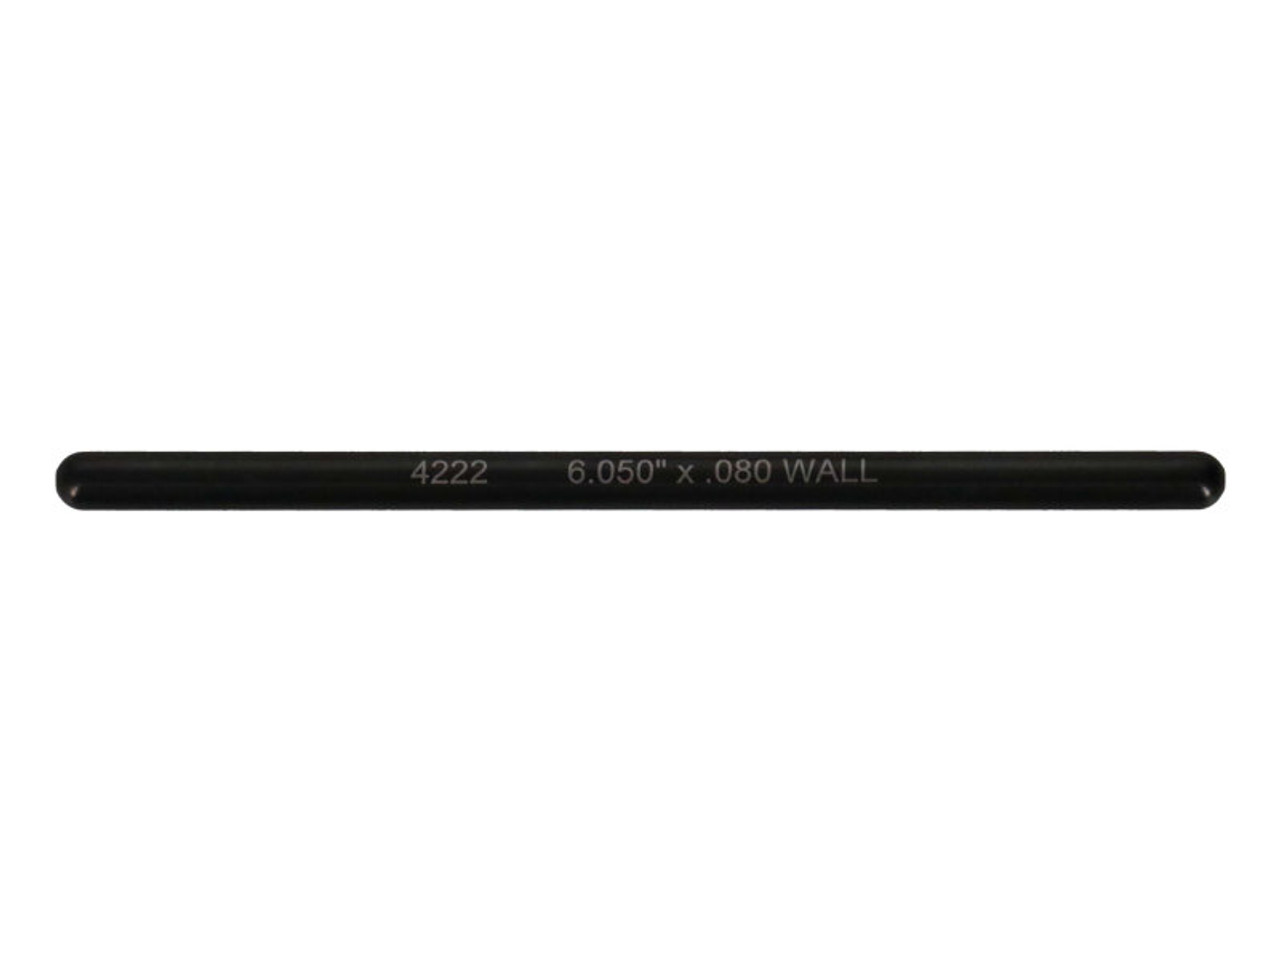 Manley Swedged End 4130 Chrome Moly Pushrods 7.900in Lenth 0.120 Wall 5/16in Diameter (Set of 16) - 25237-16 User 3